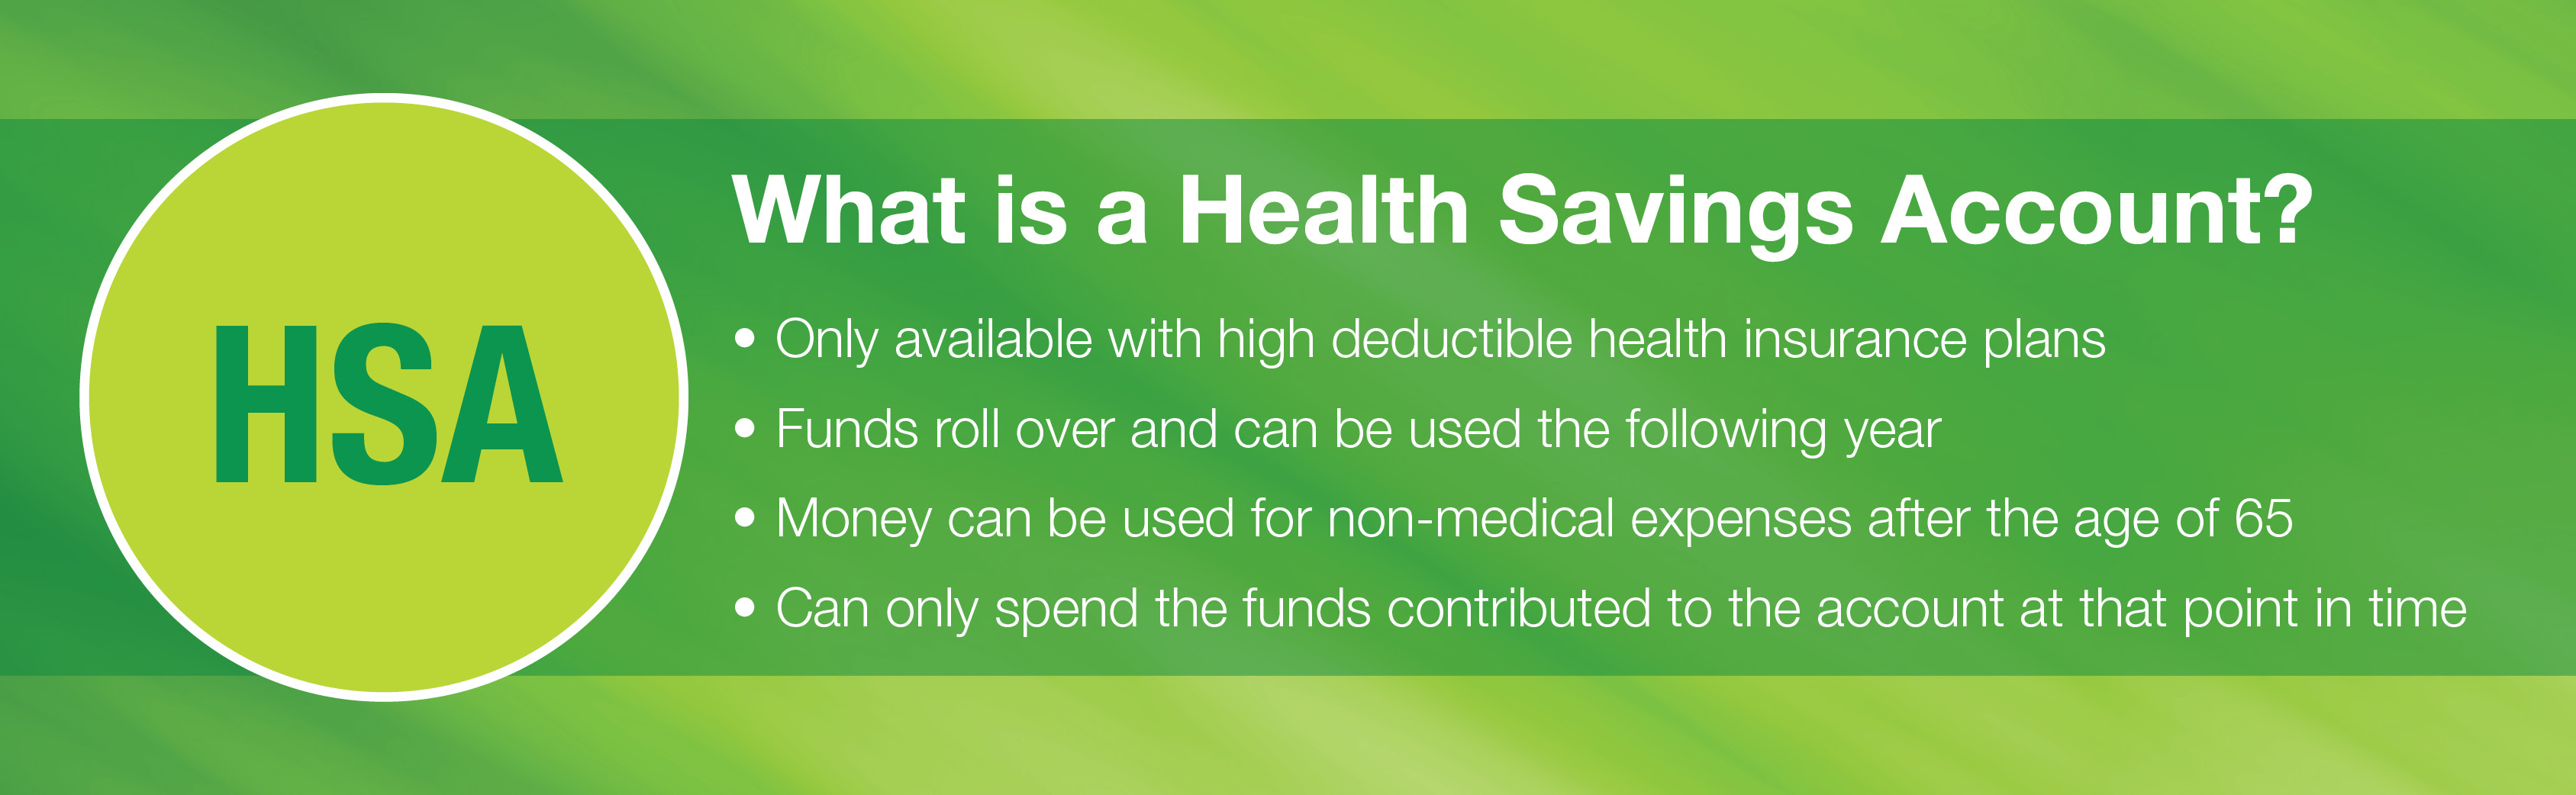 5 Things to Know About Health Savings Accounts ThinkHealth